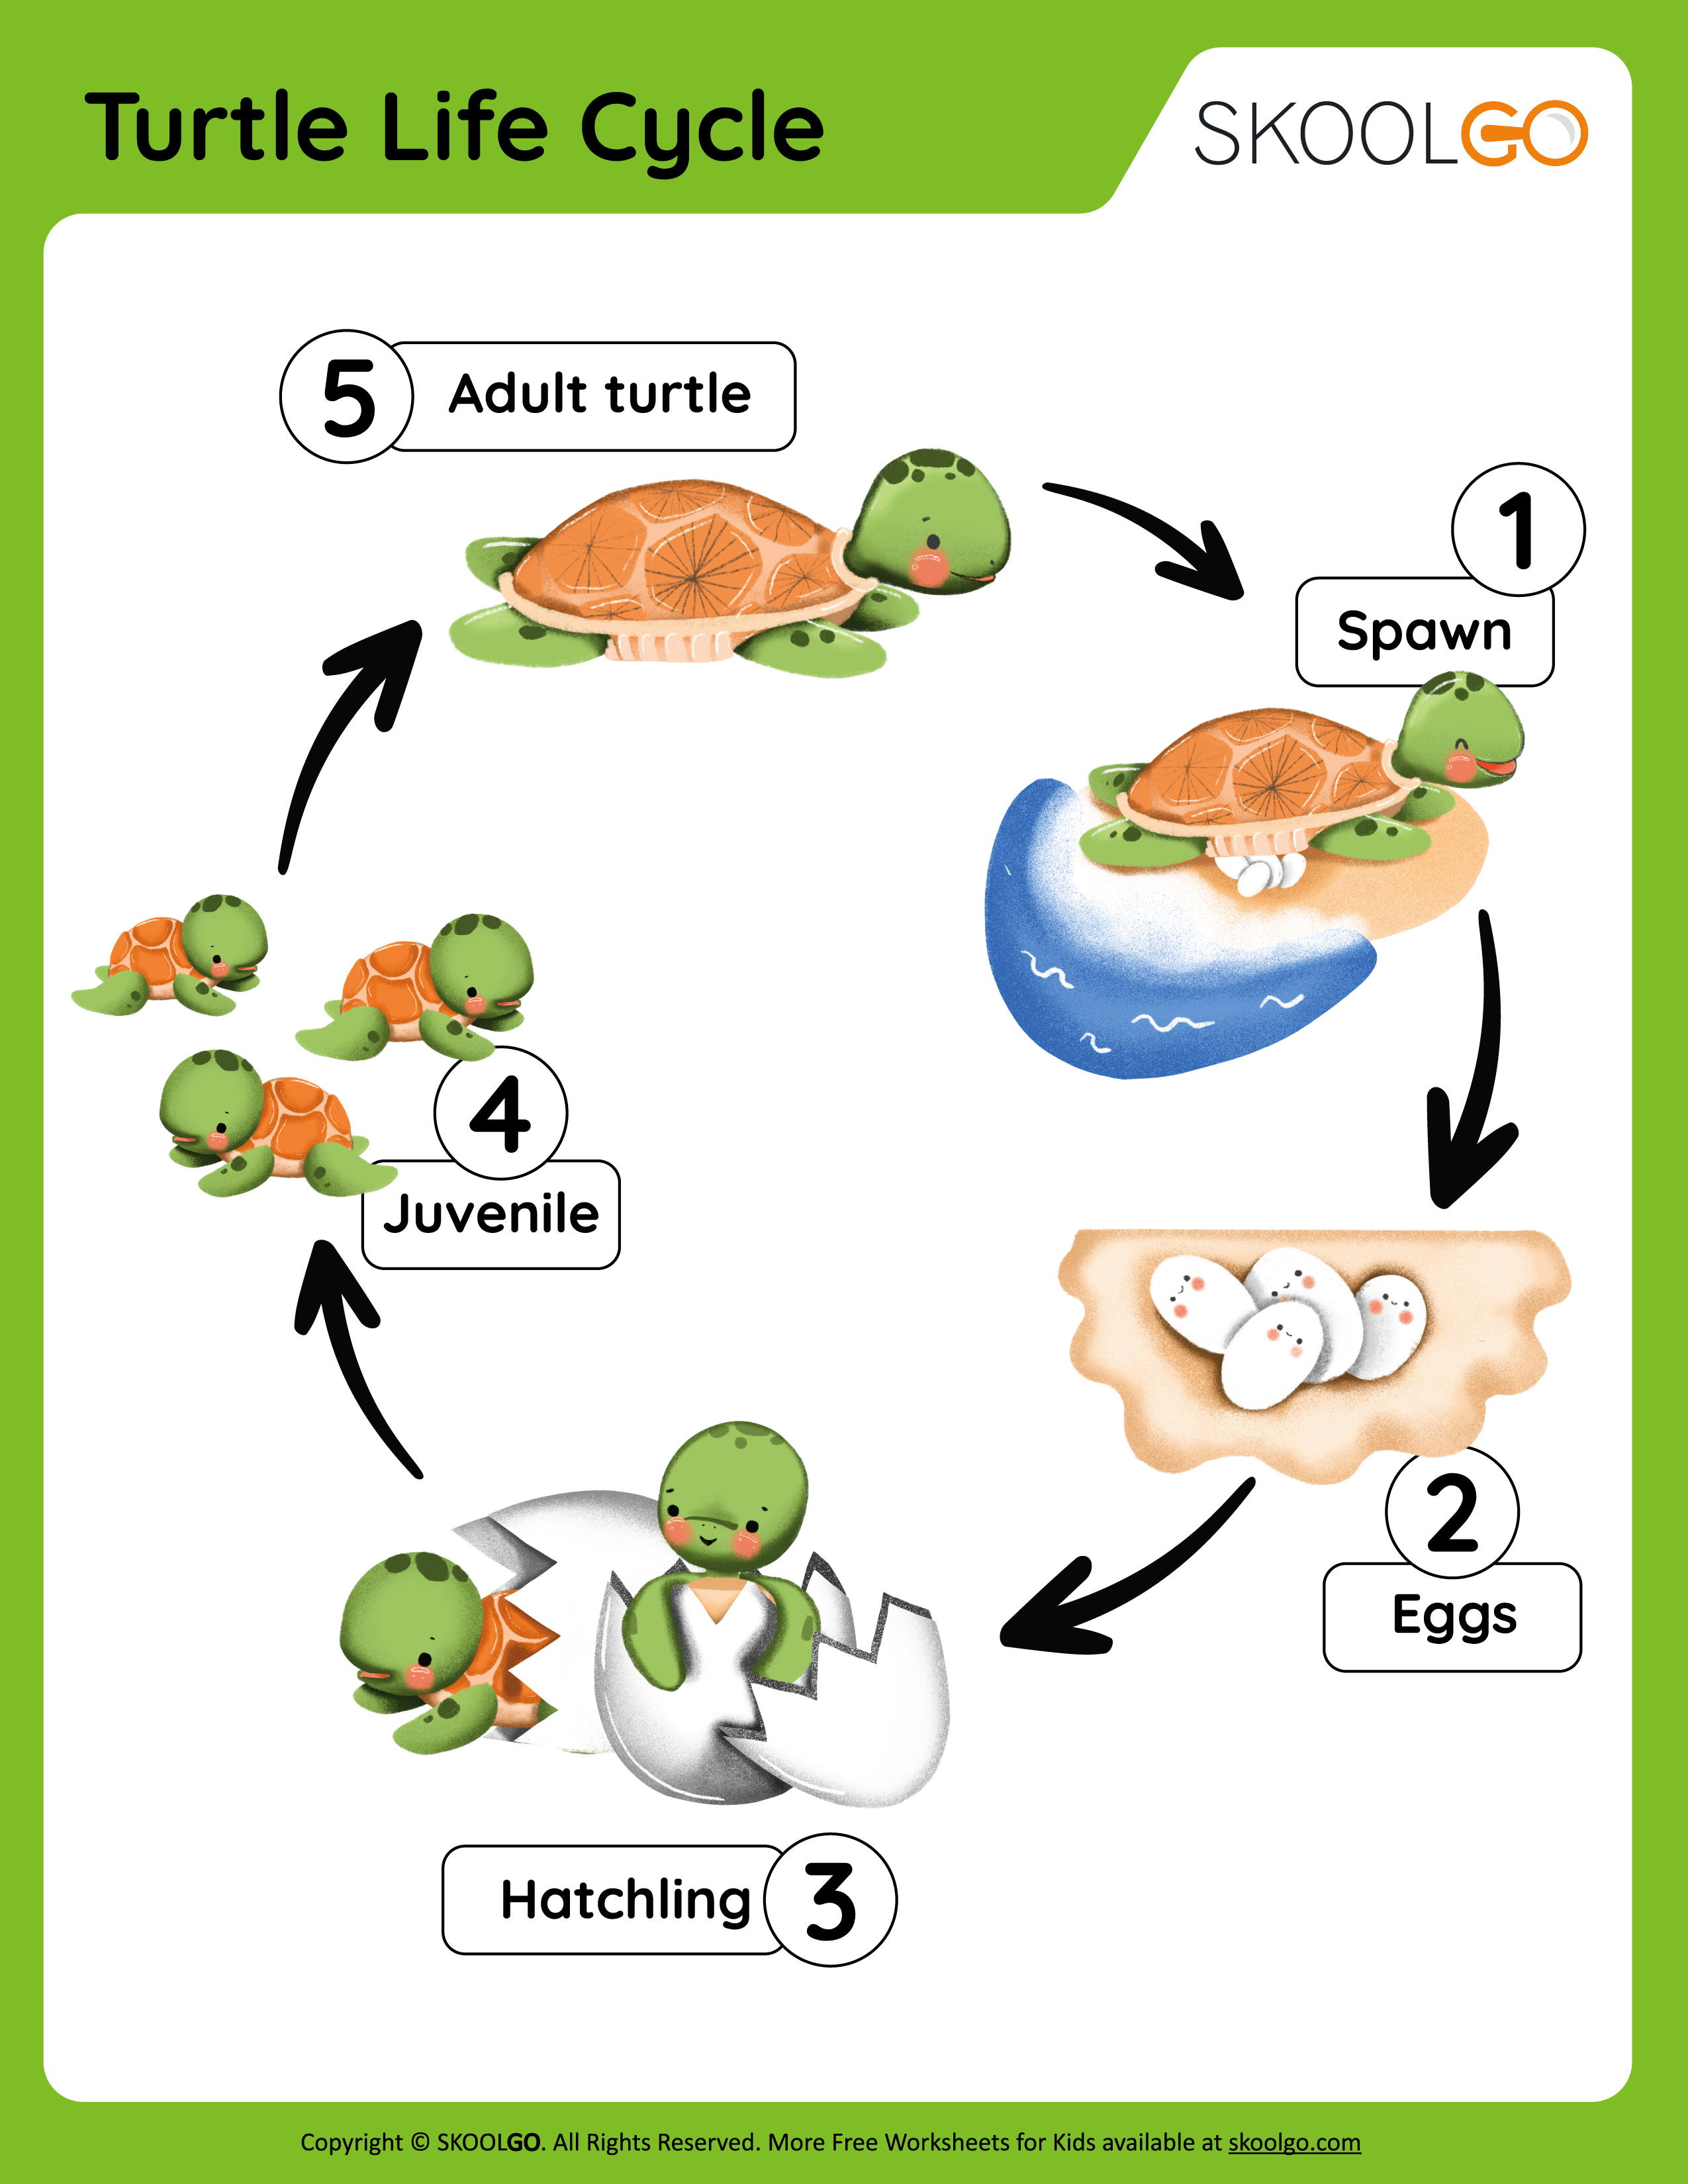 Turtle Life Cycle - Free Worksheet for Kids